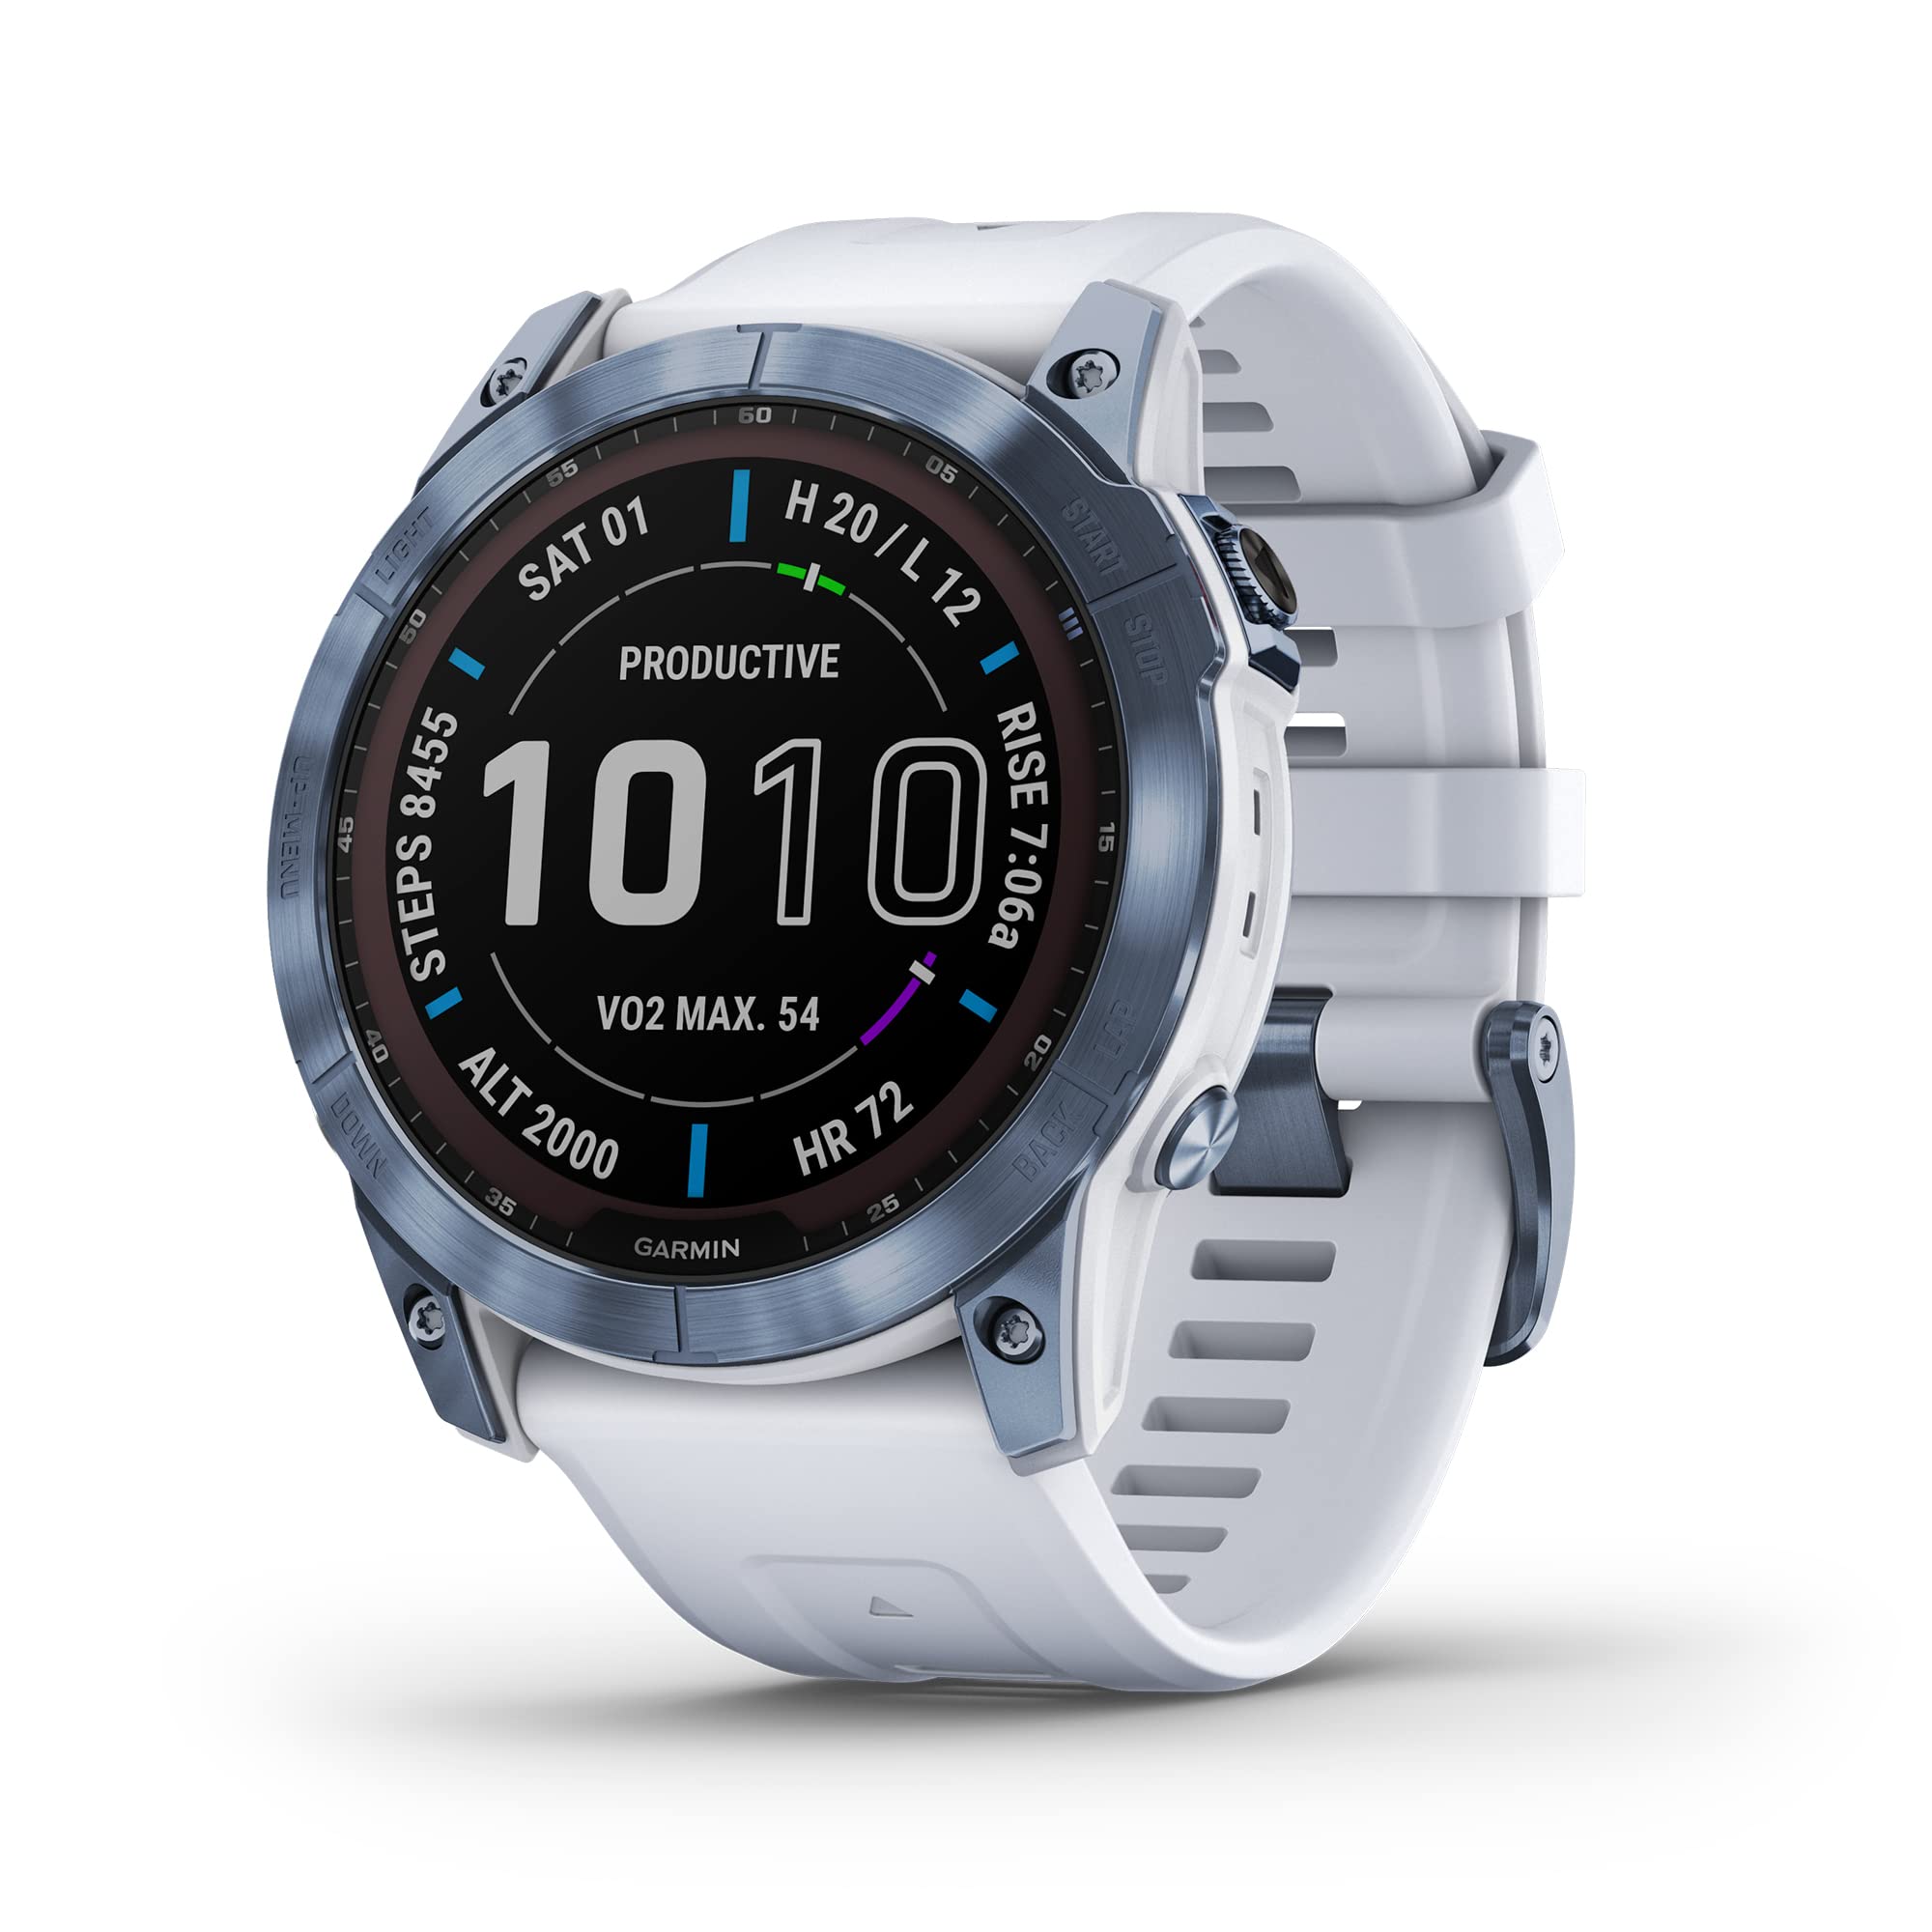 Garmin fenix 7X Sapphire Solar, Larger adventure smartwatch, with Solar Charging Capabilities, rugged outdoor GPS watch, touchscreen, wellness features, mineral blue DLC titanium with whitestone band